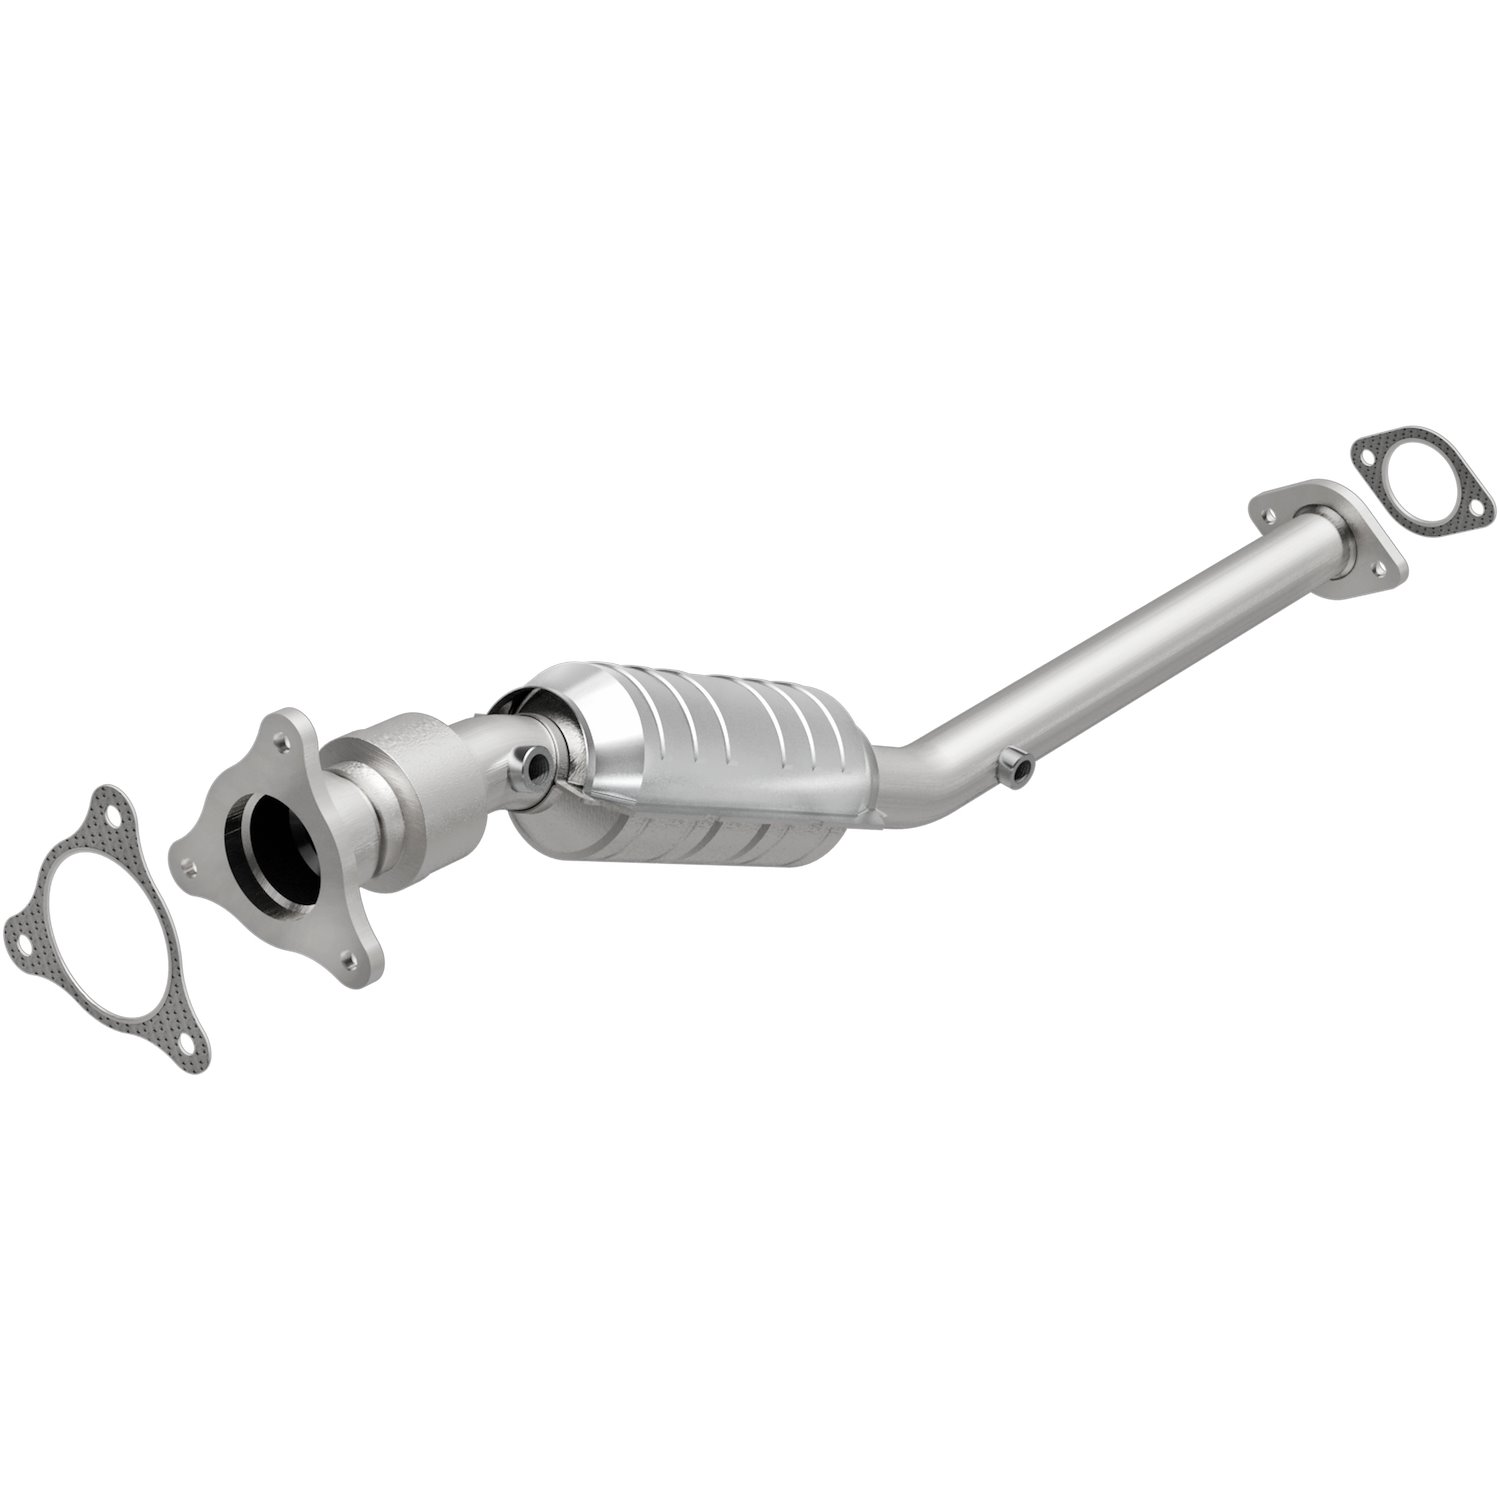 OEM Grade Federal / EPA Compliant Direct-Fit Catalytic Converter 51240